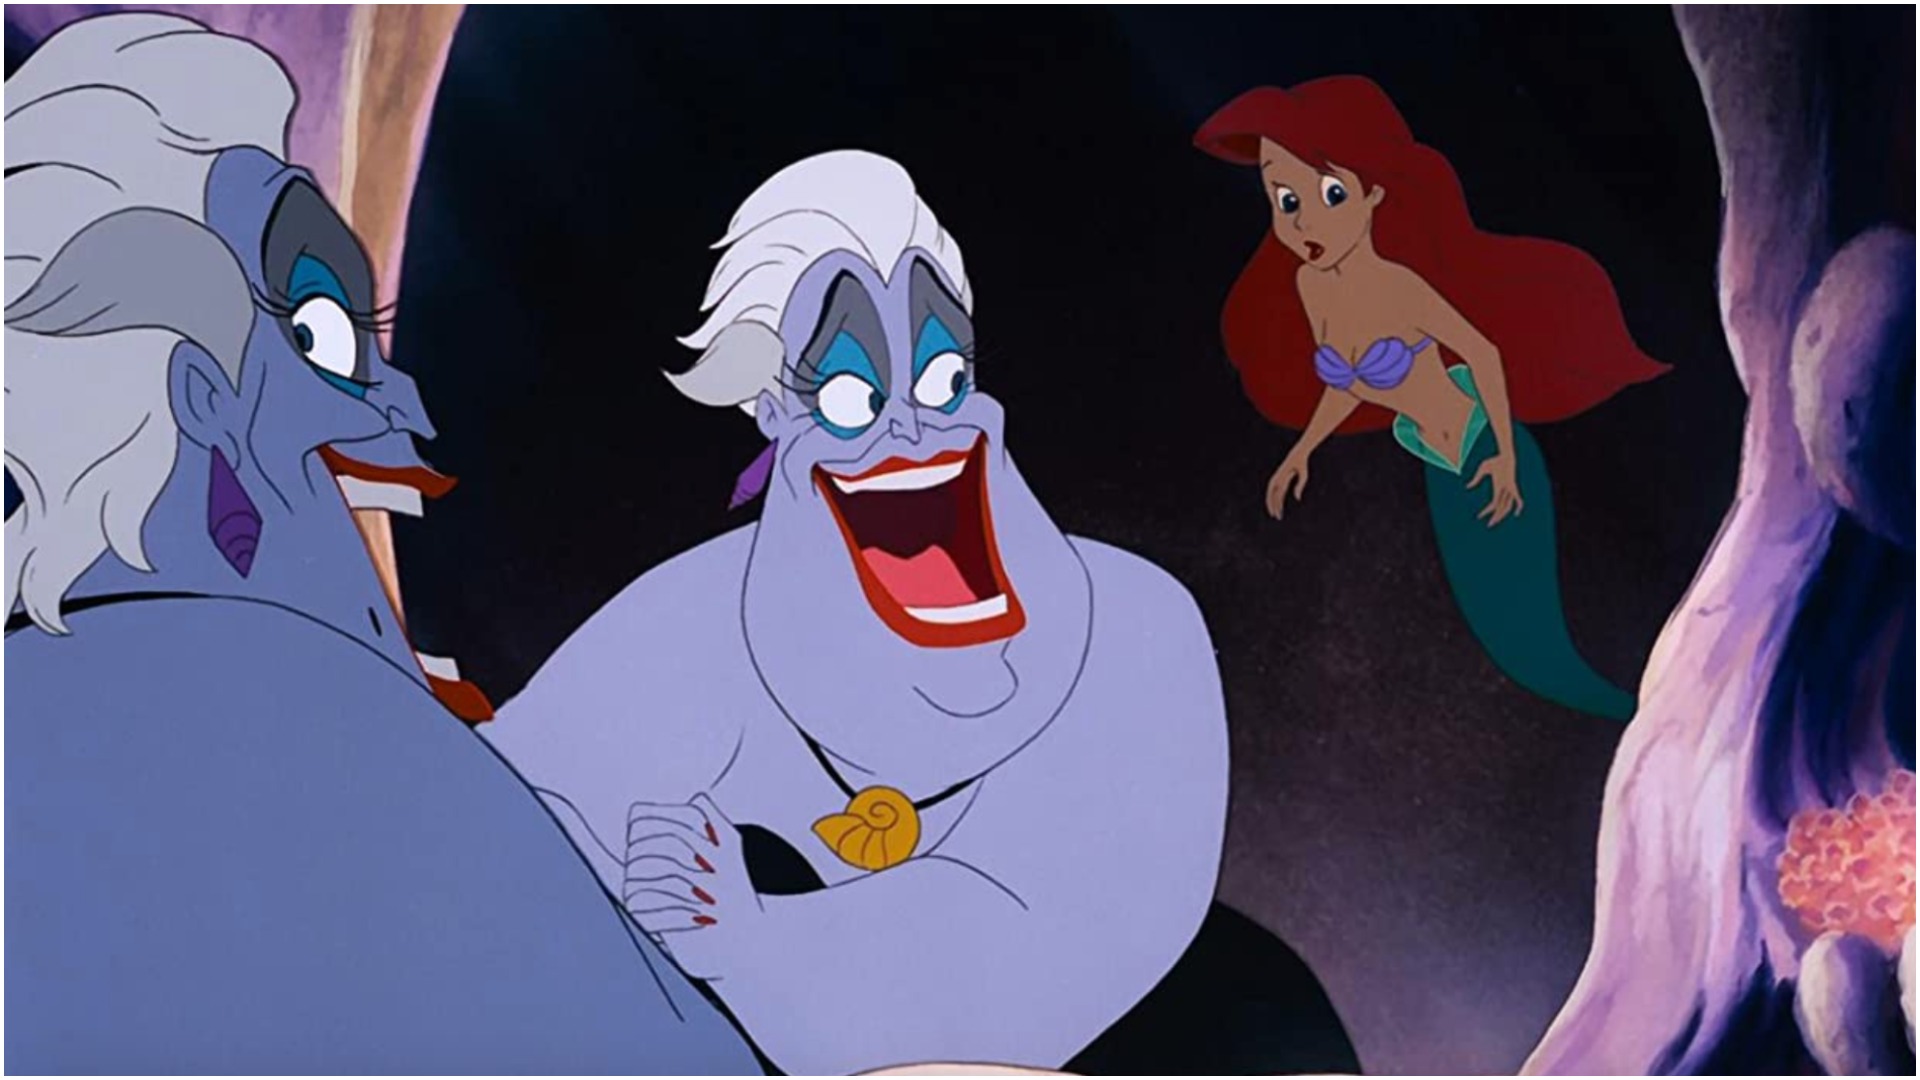 The Little Mermaid: The 3 big changes from OG to live-action